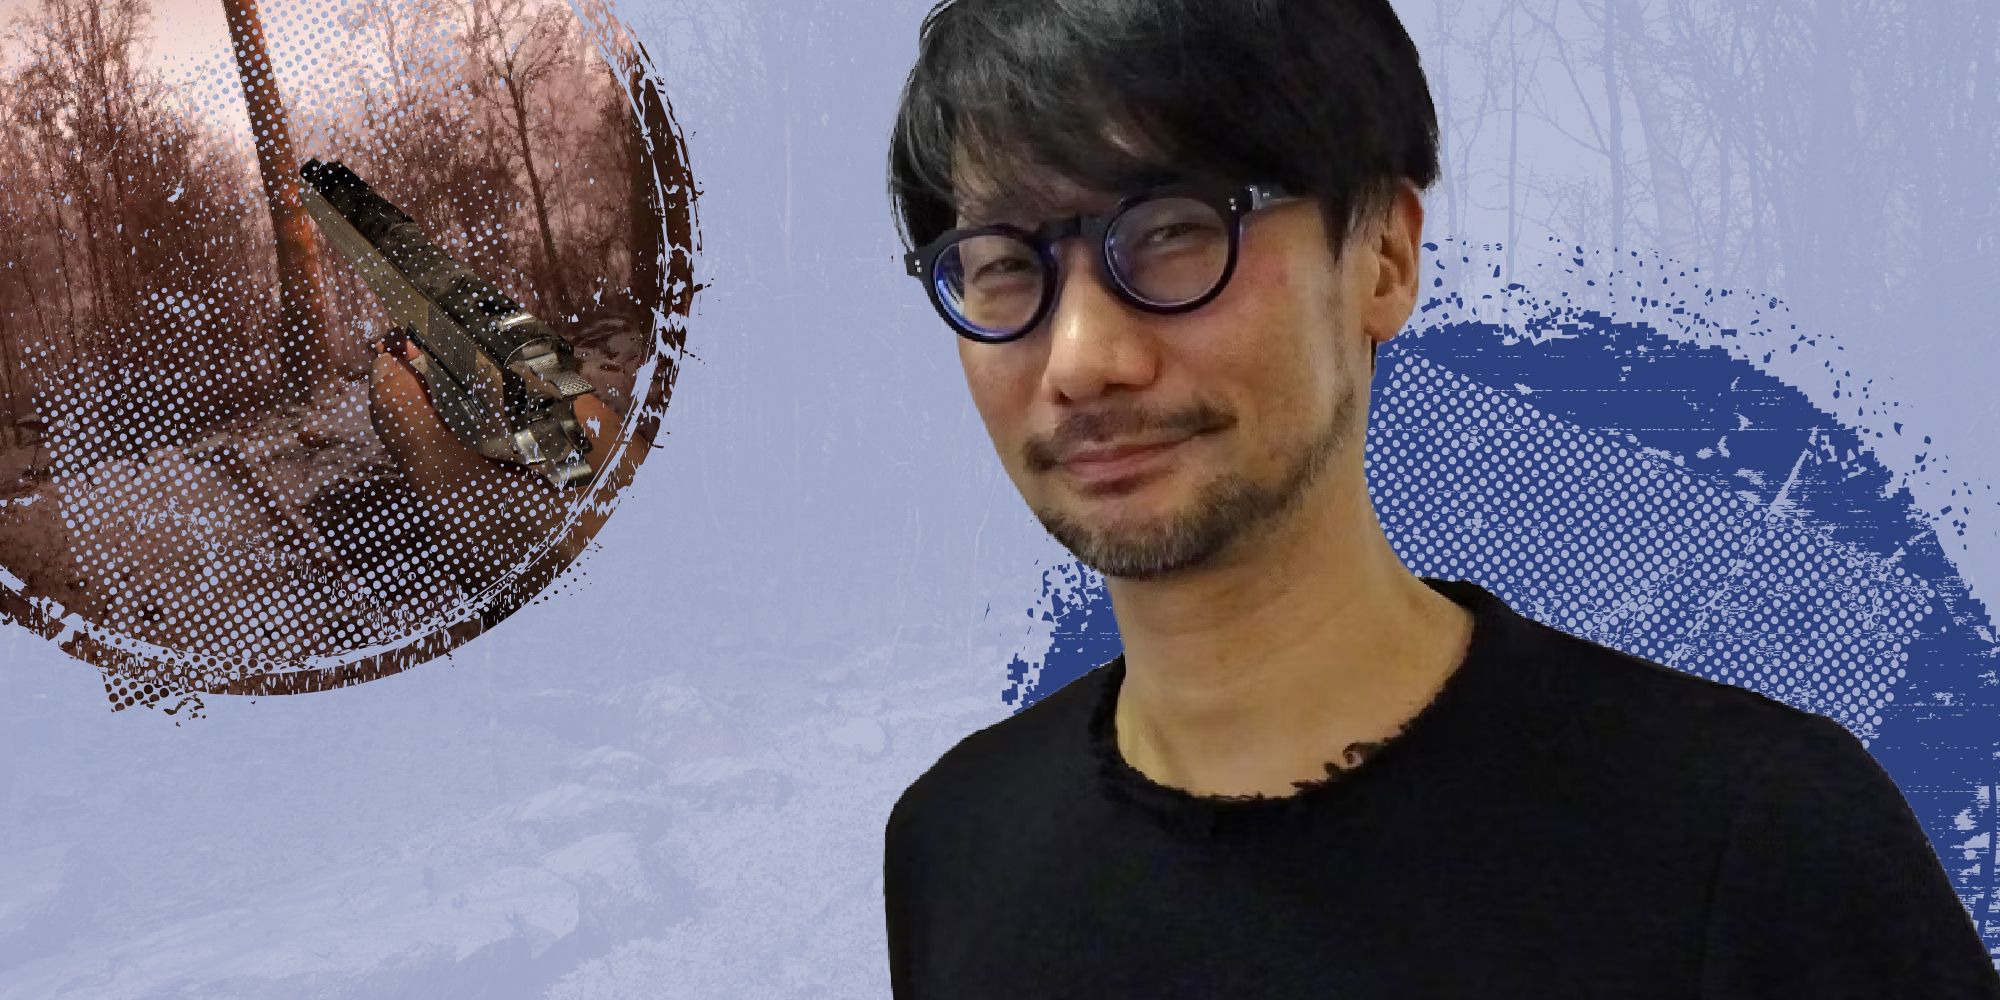 The Reasons Why Blue Box's Abandoned Could Actually Be A Hideo